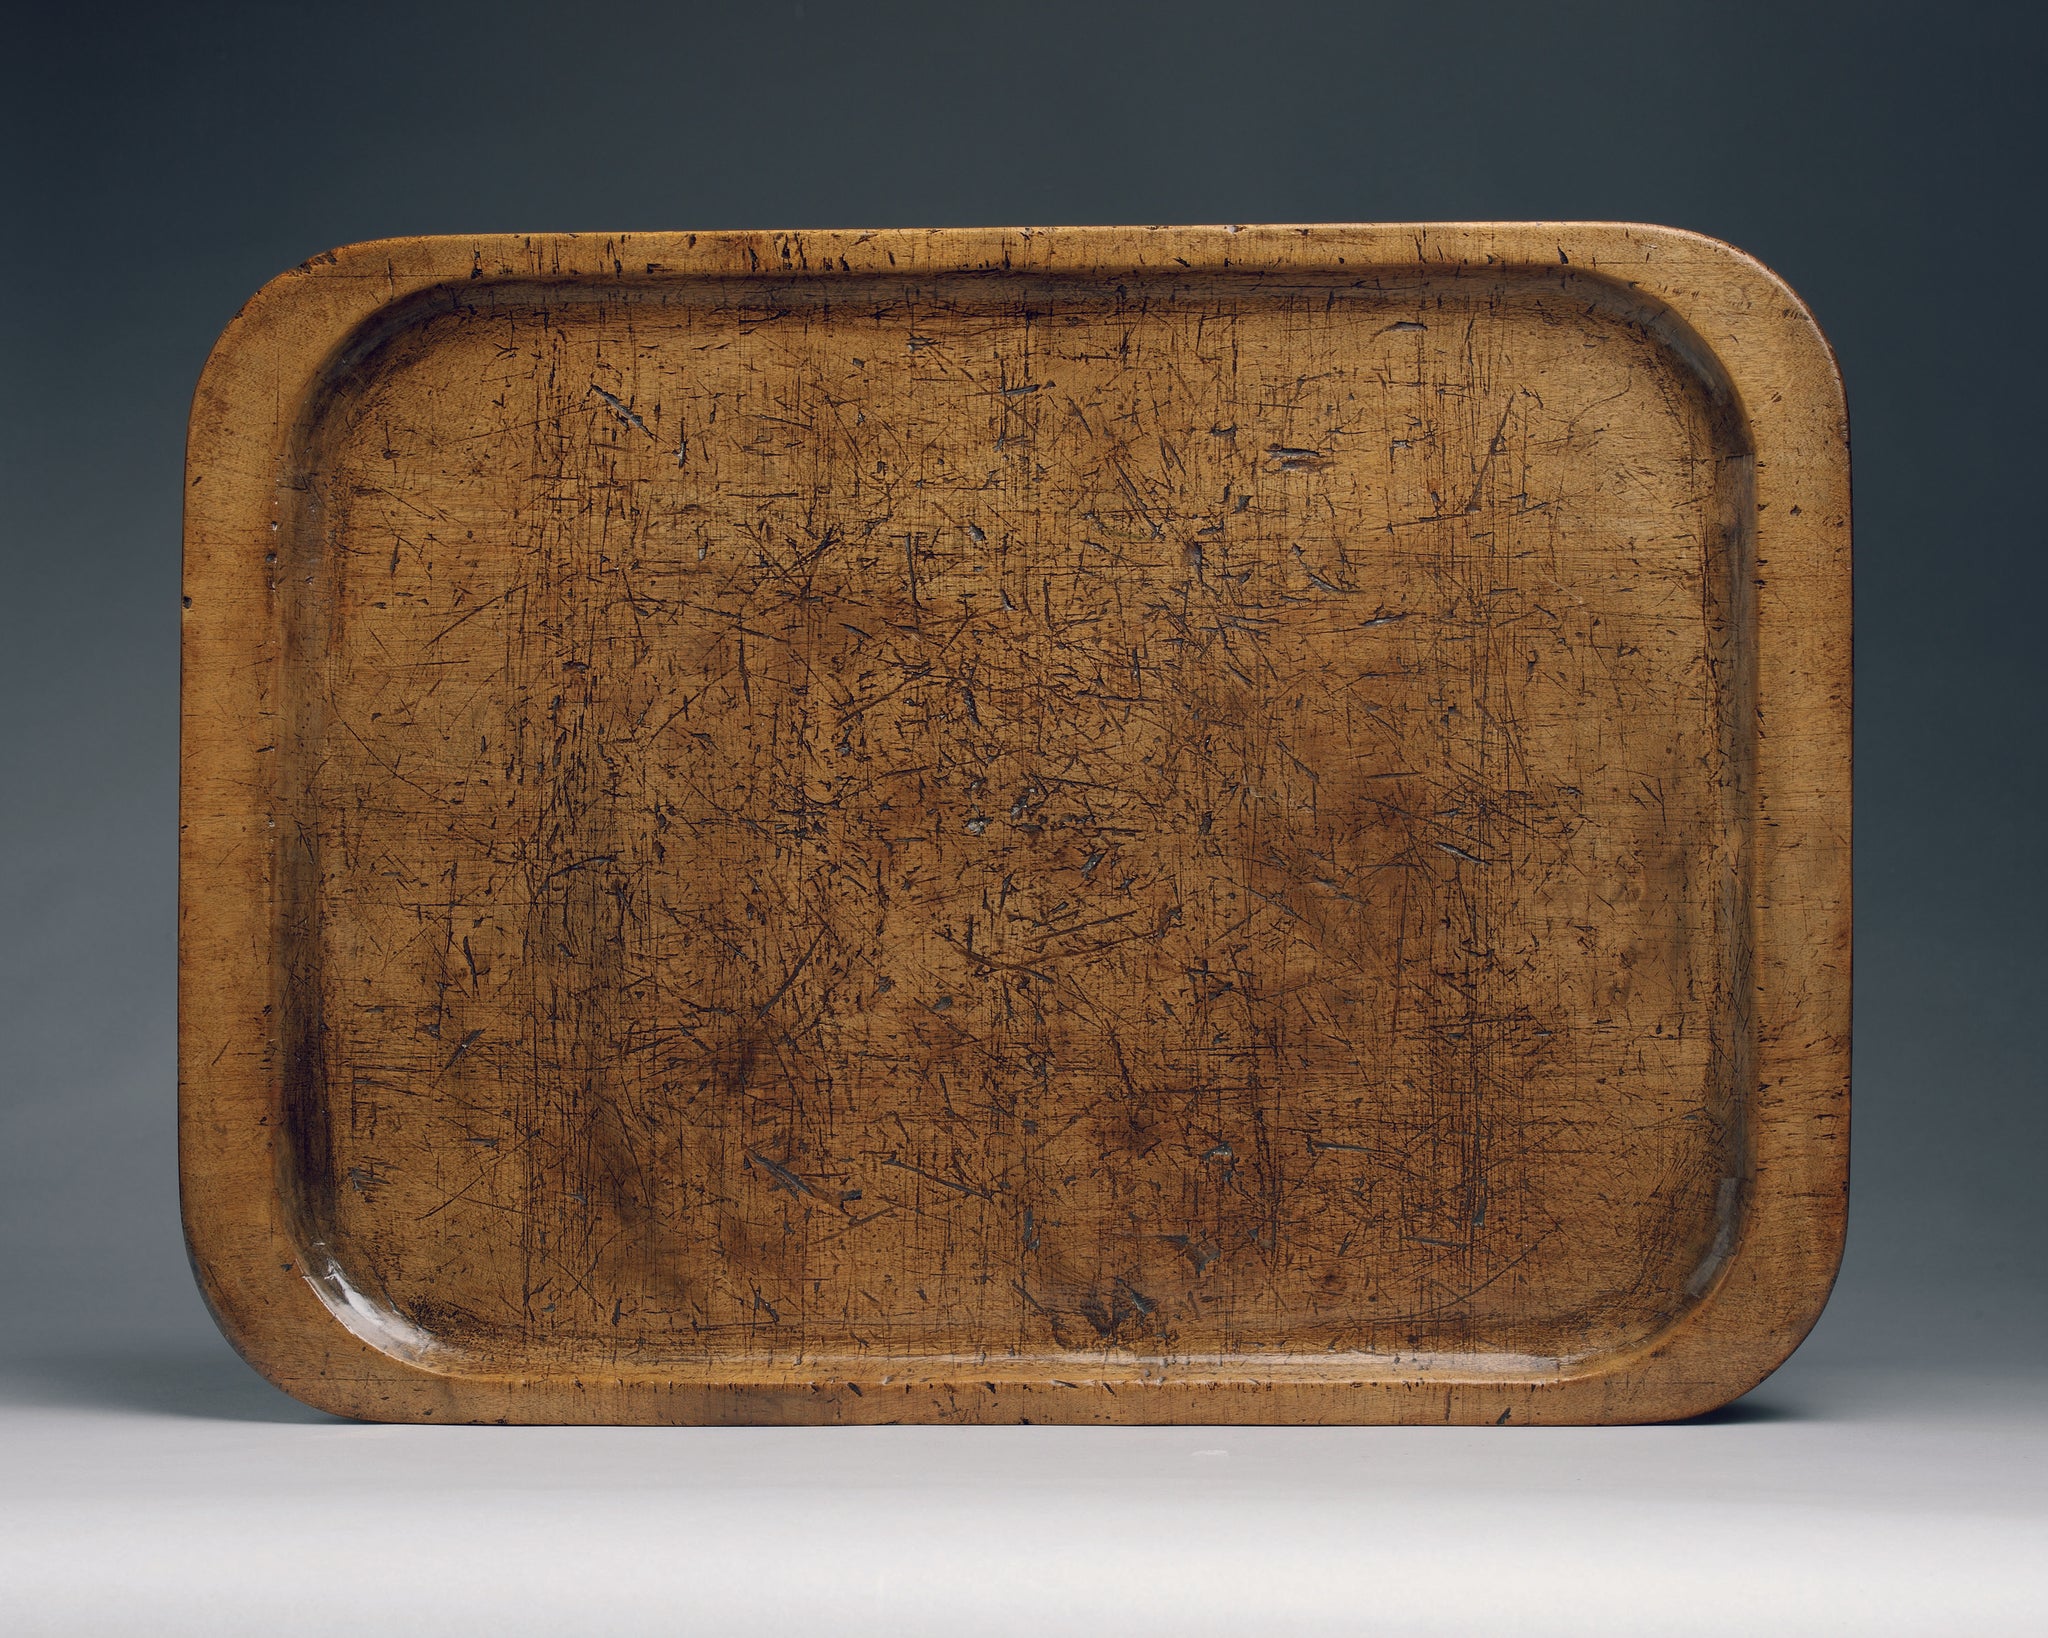 Magnificent Serving platter or 'Common Dish'